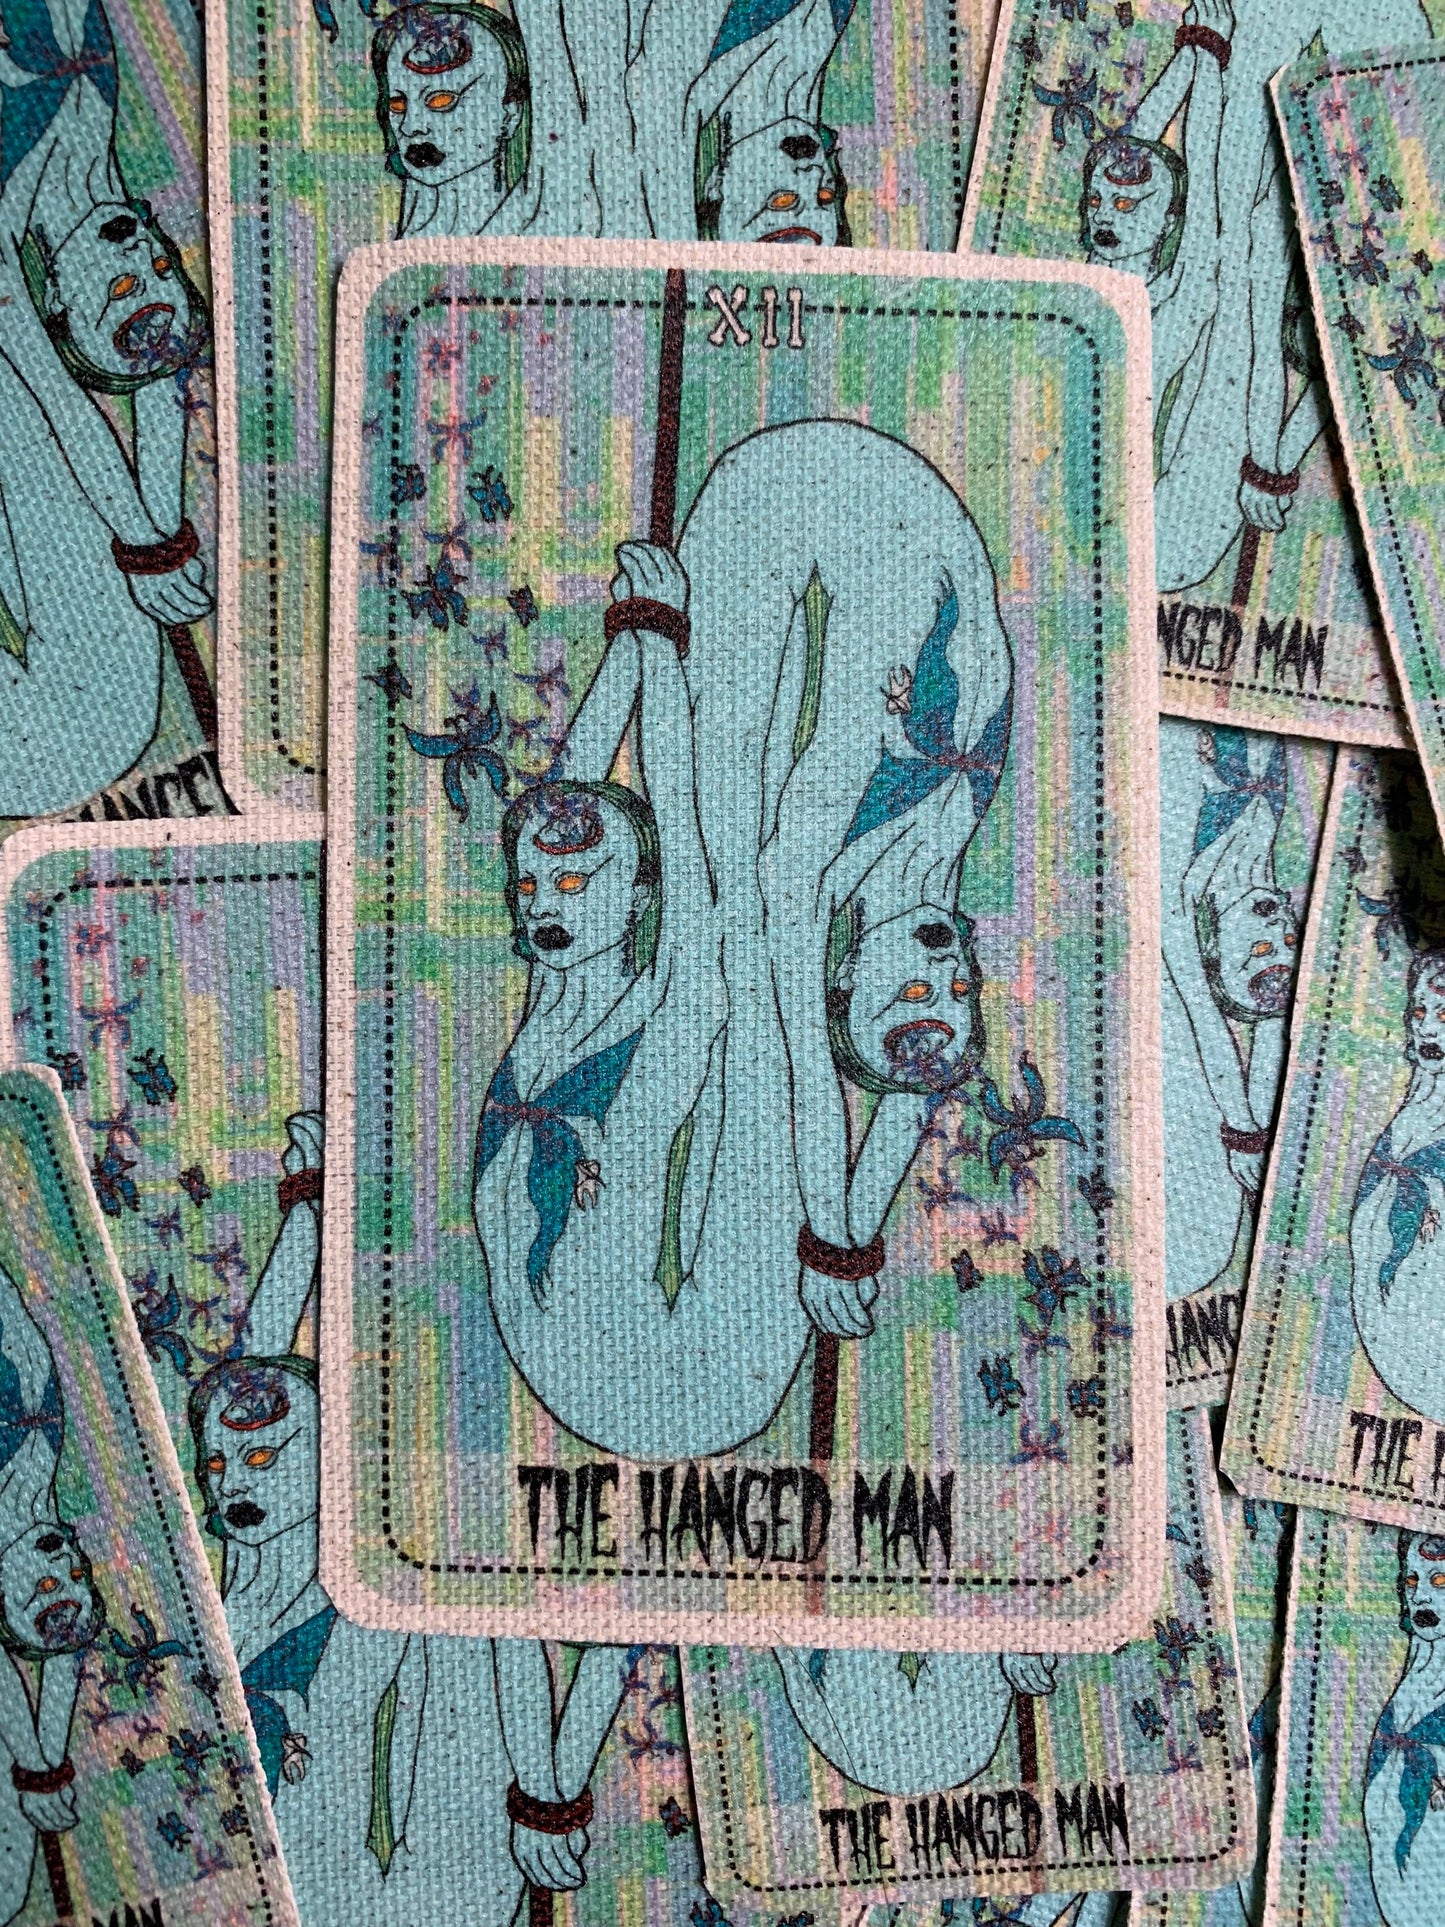 The Hanged Man Patch